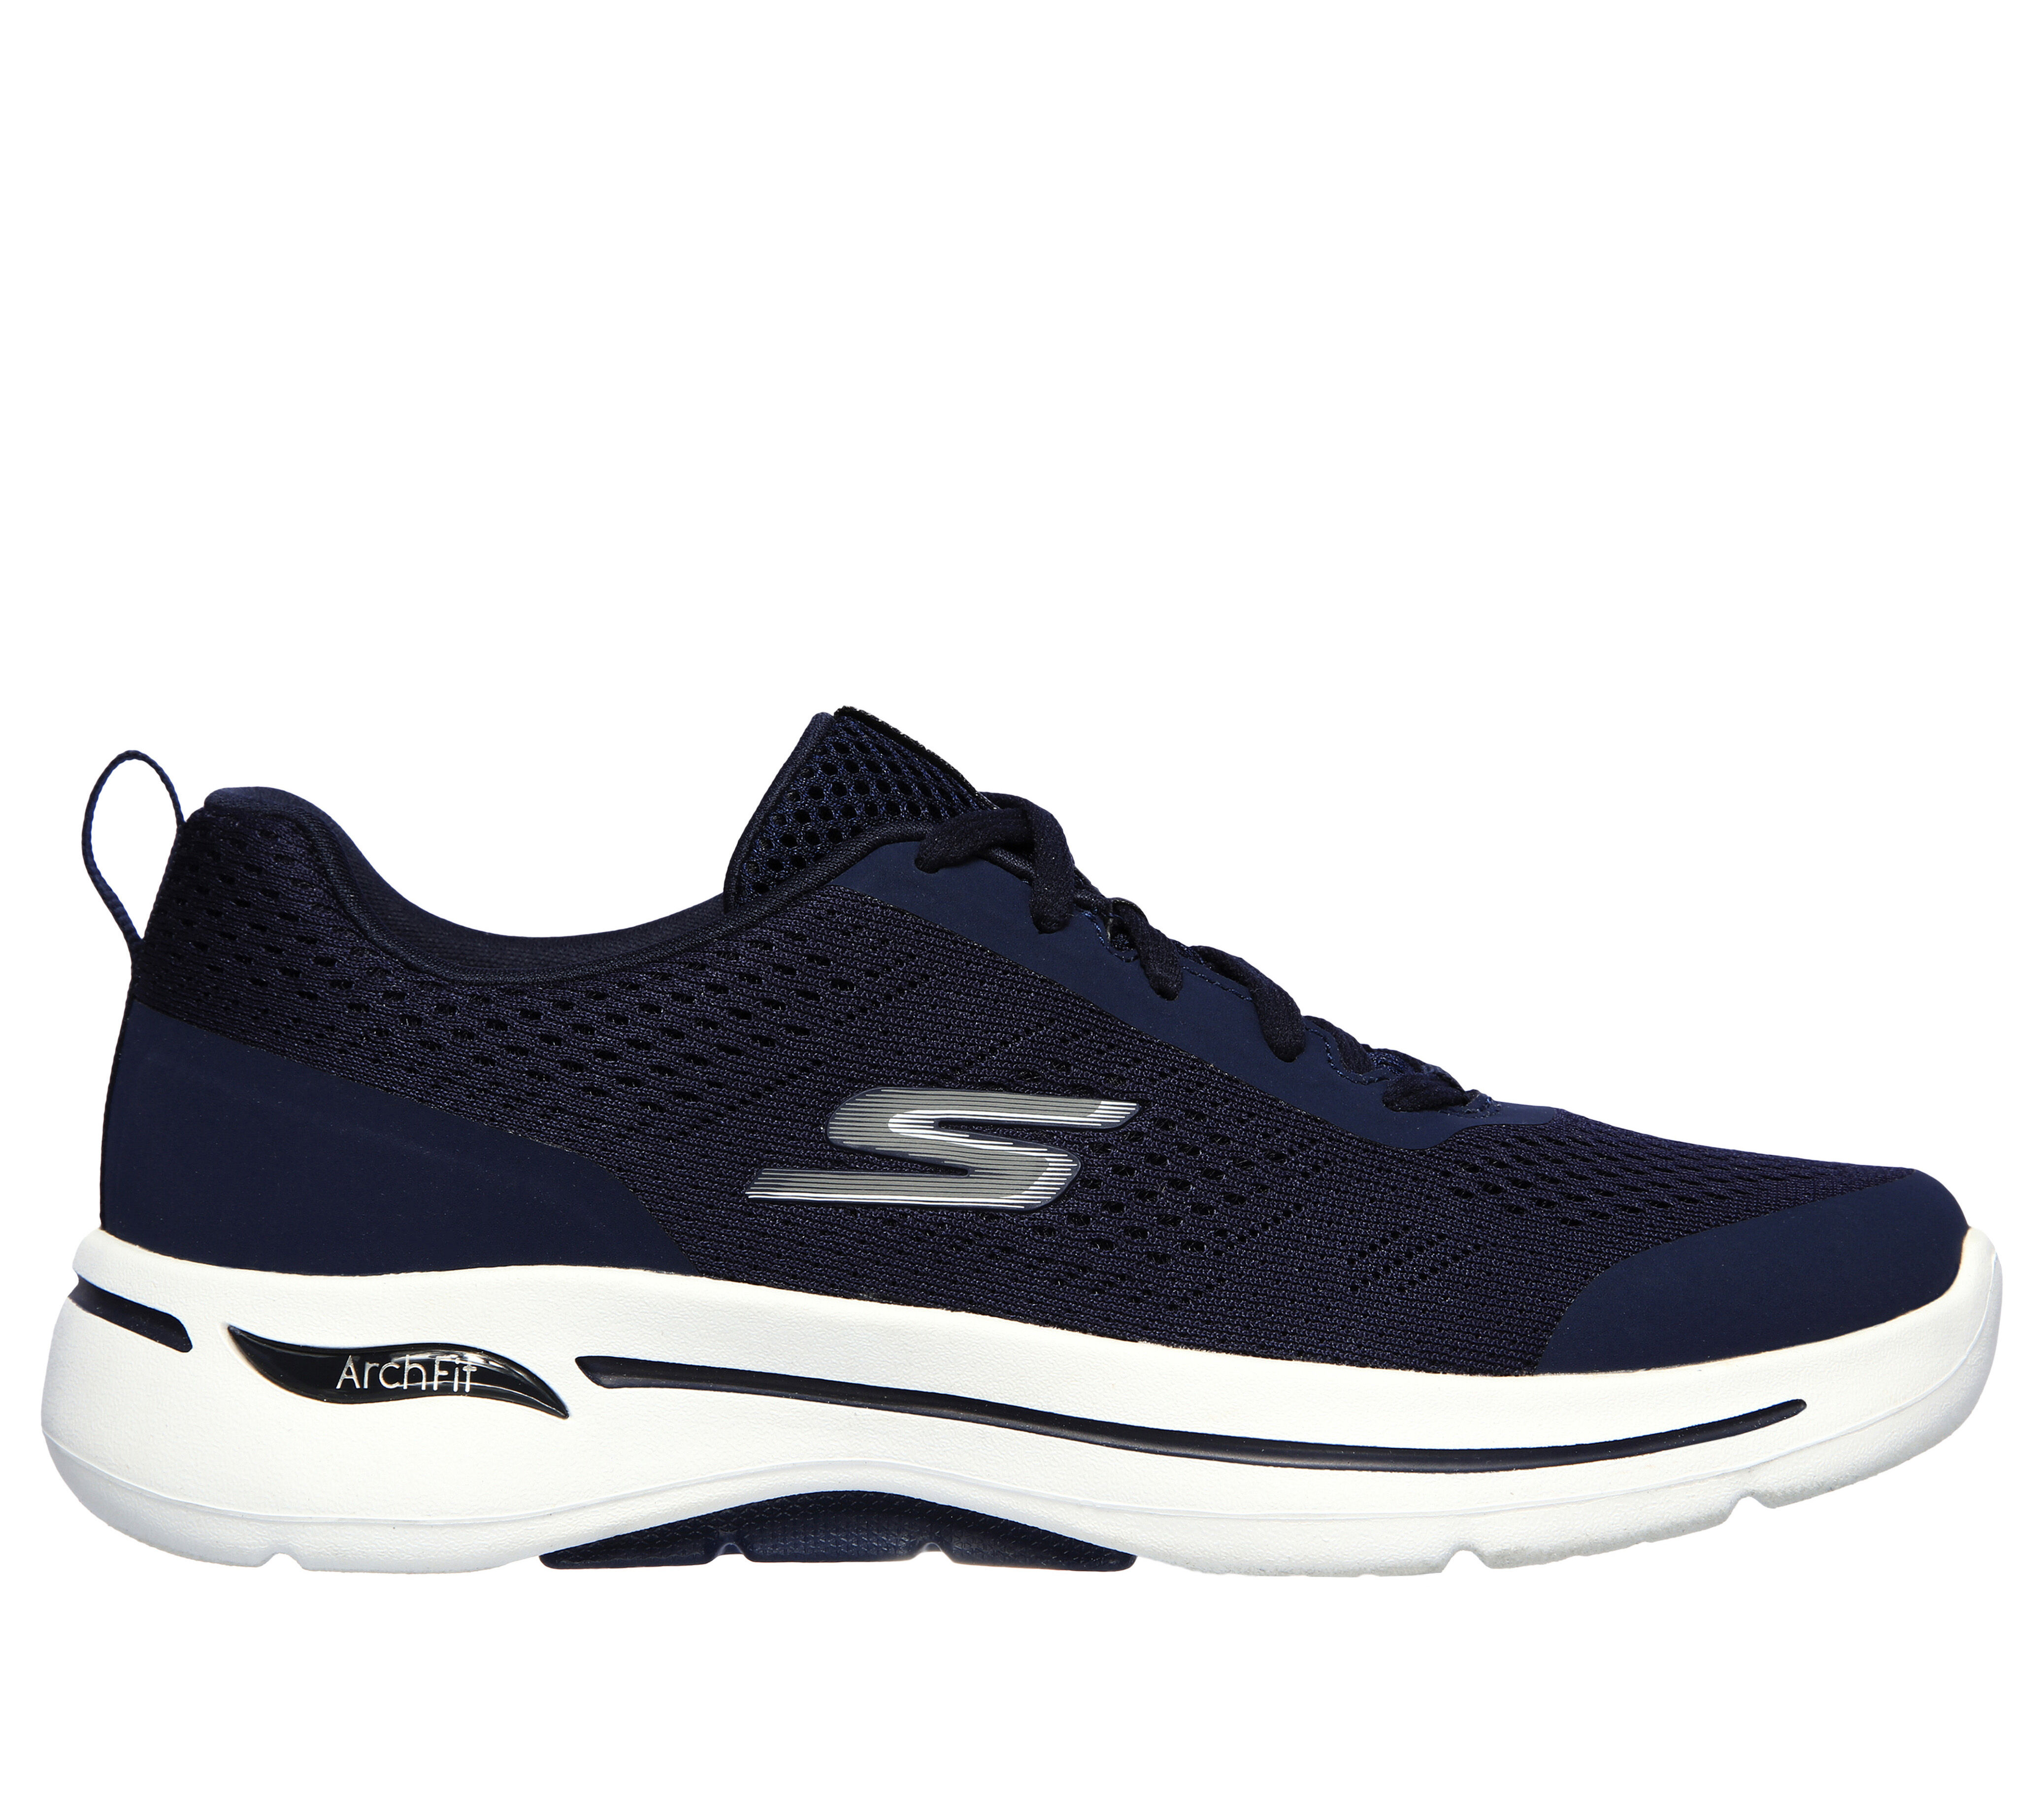 SKECHERS Official Site | Comfort That 